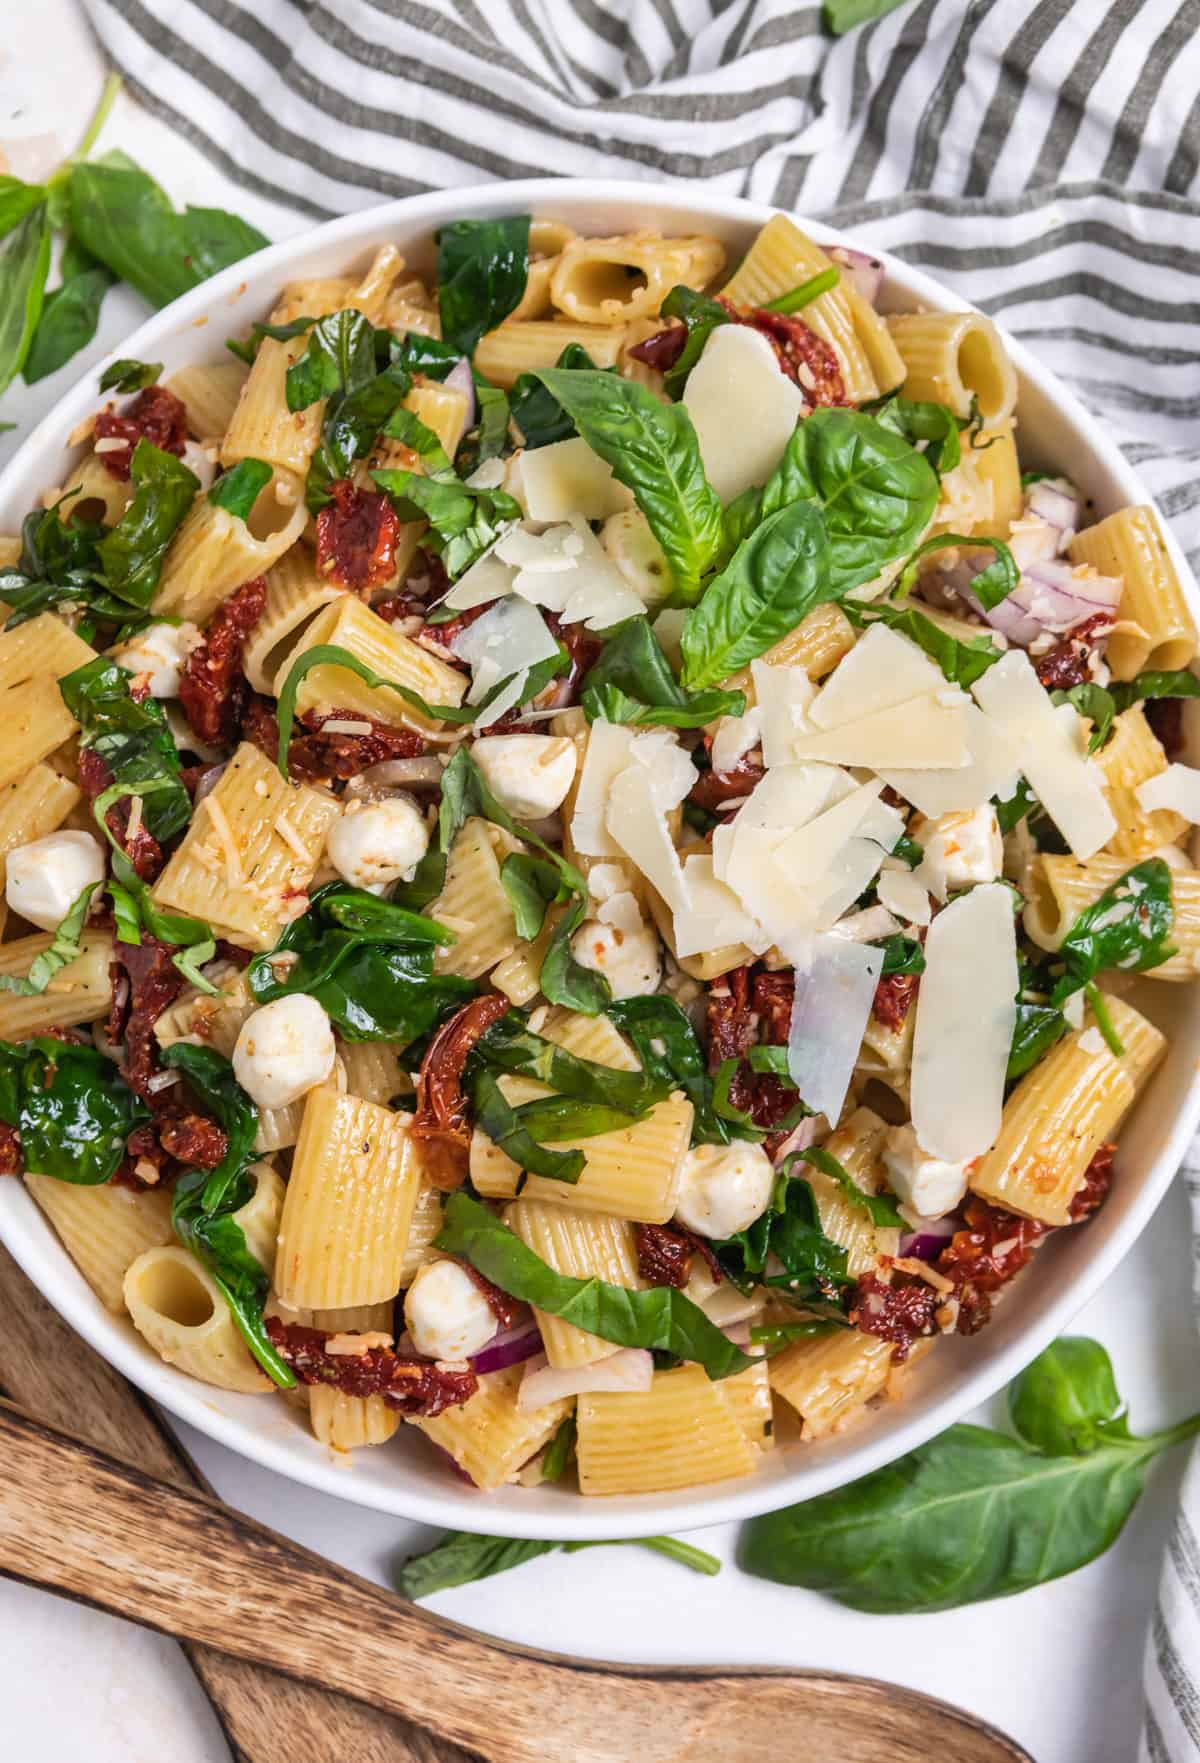 Overhead view of sun dried tomato pasta salad with fresh basil, mozzarella and parmesan on top.